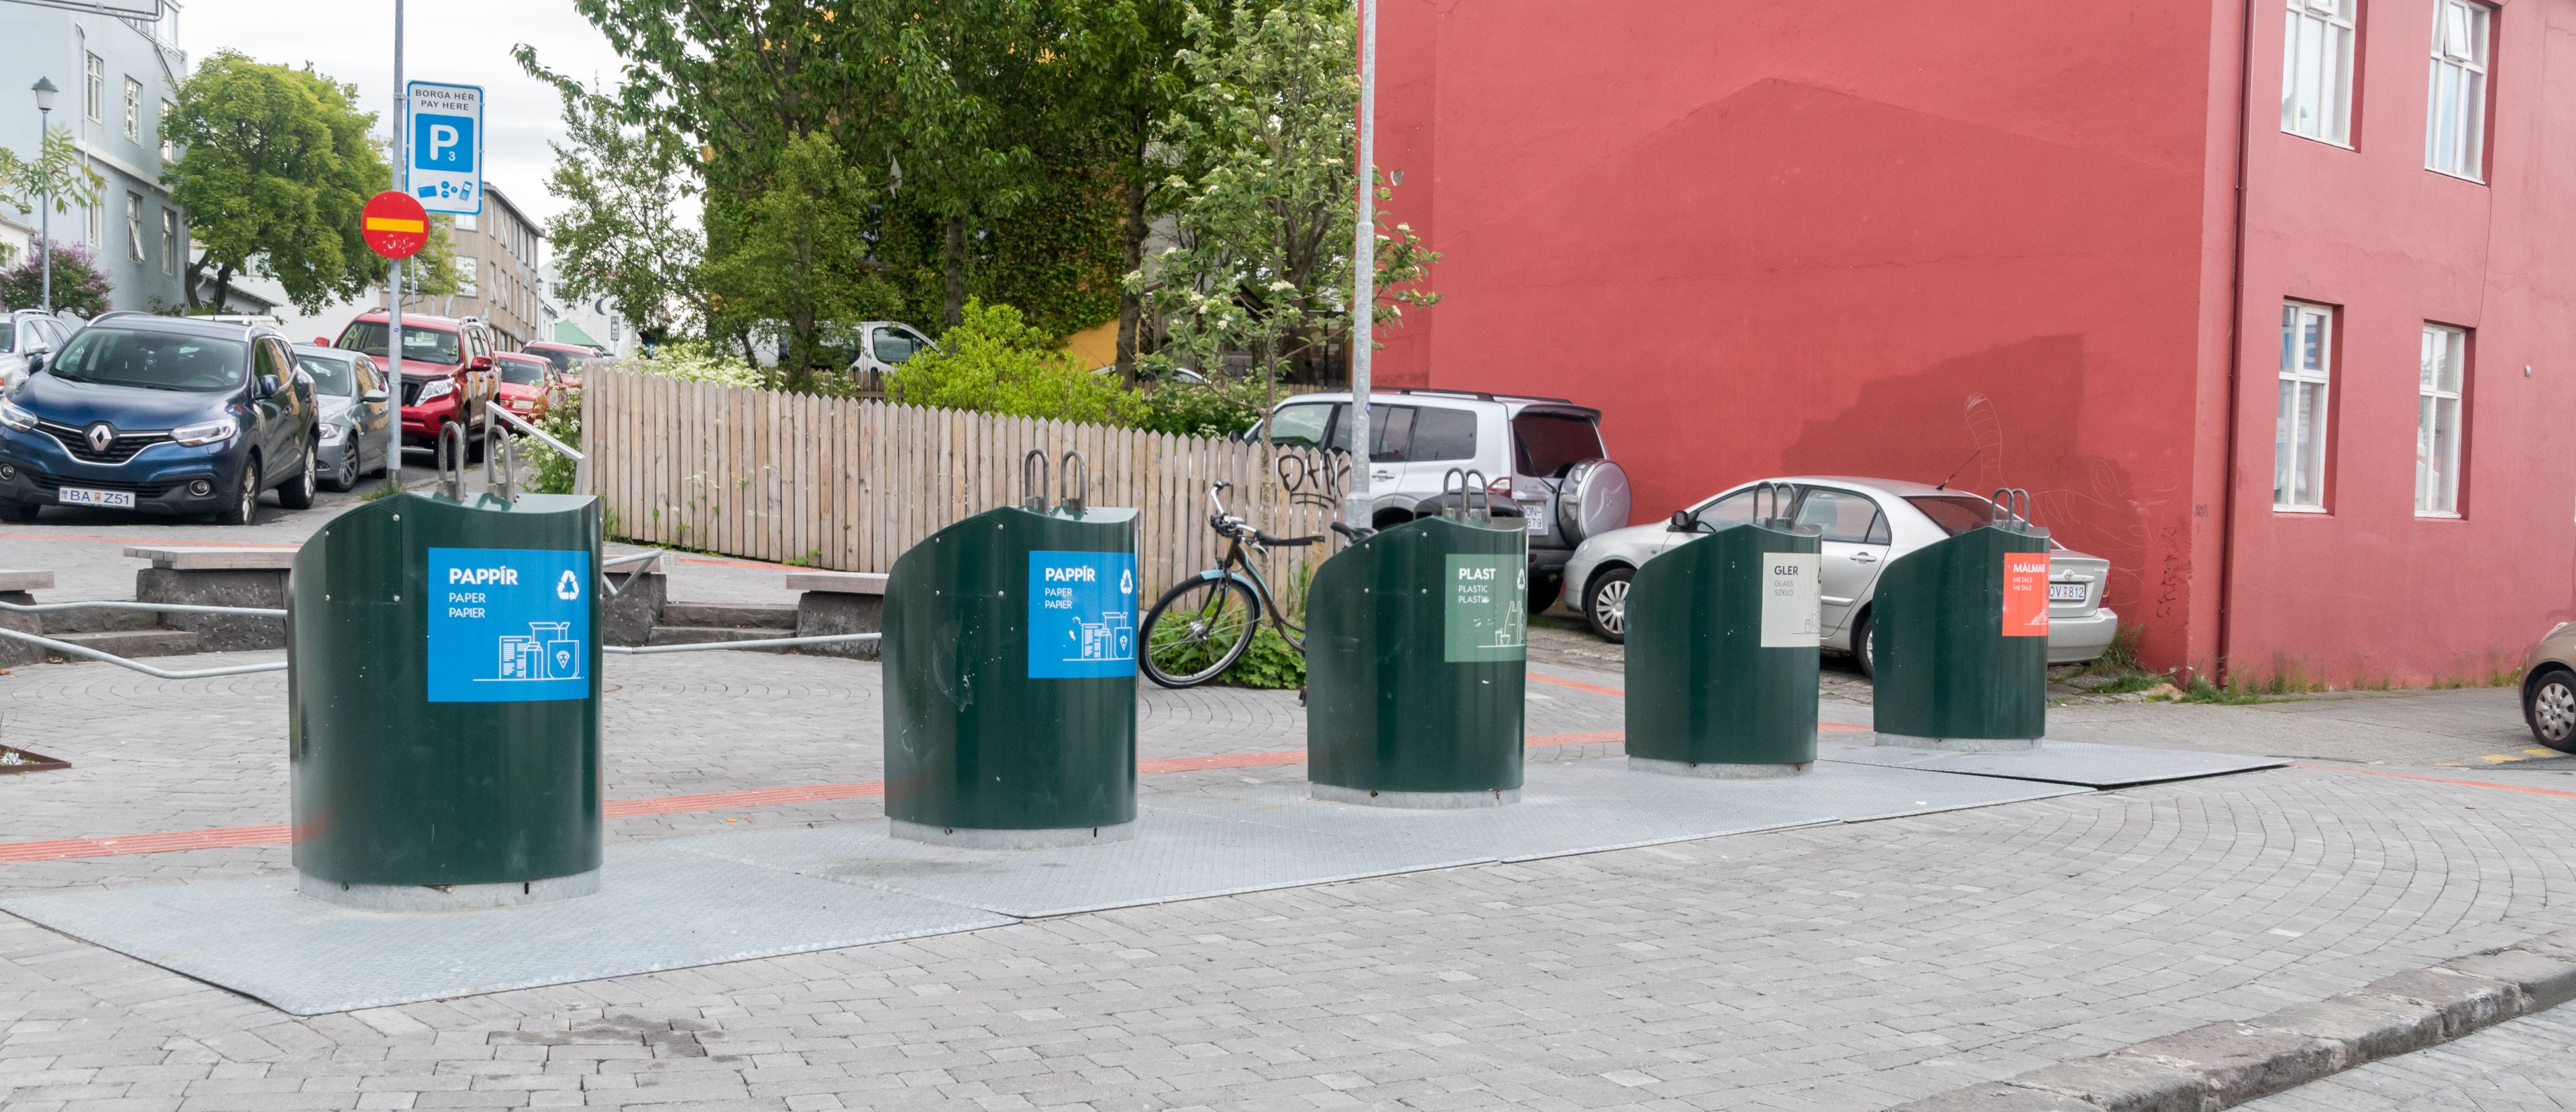 Garbage cans for selective waste collection, Reykjavik